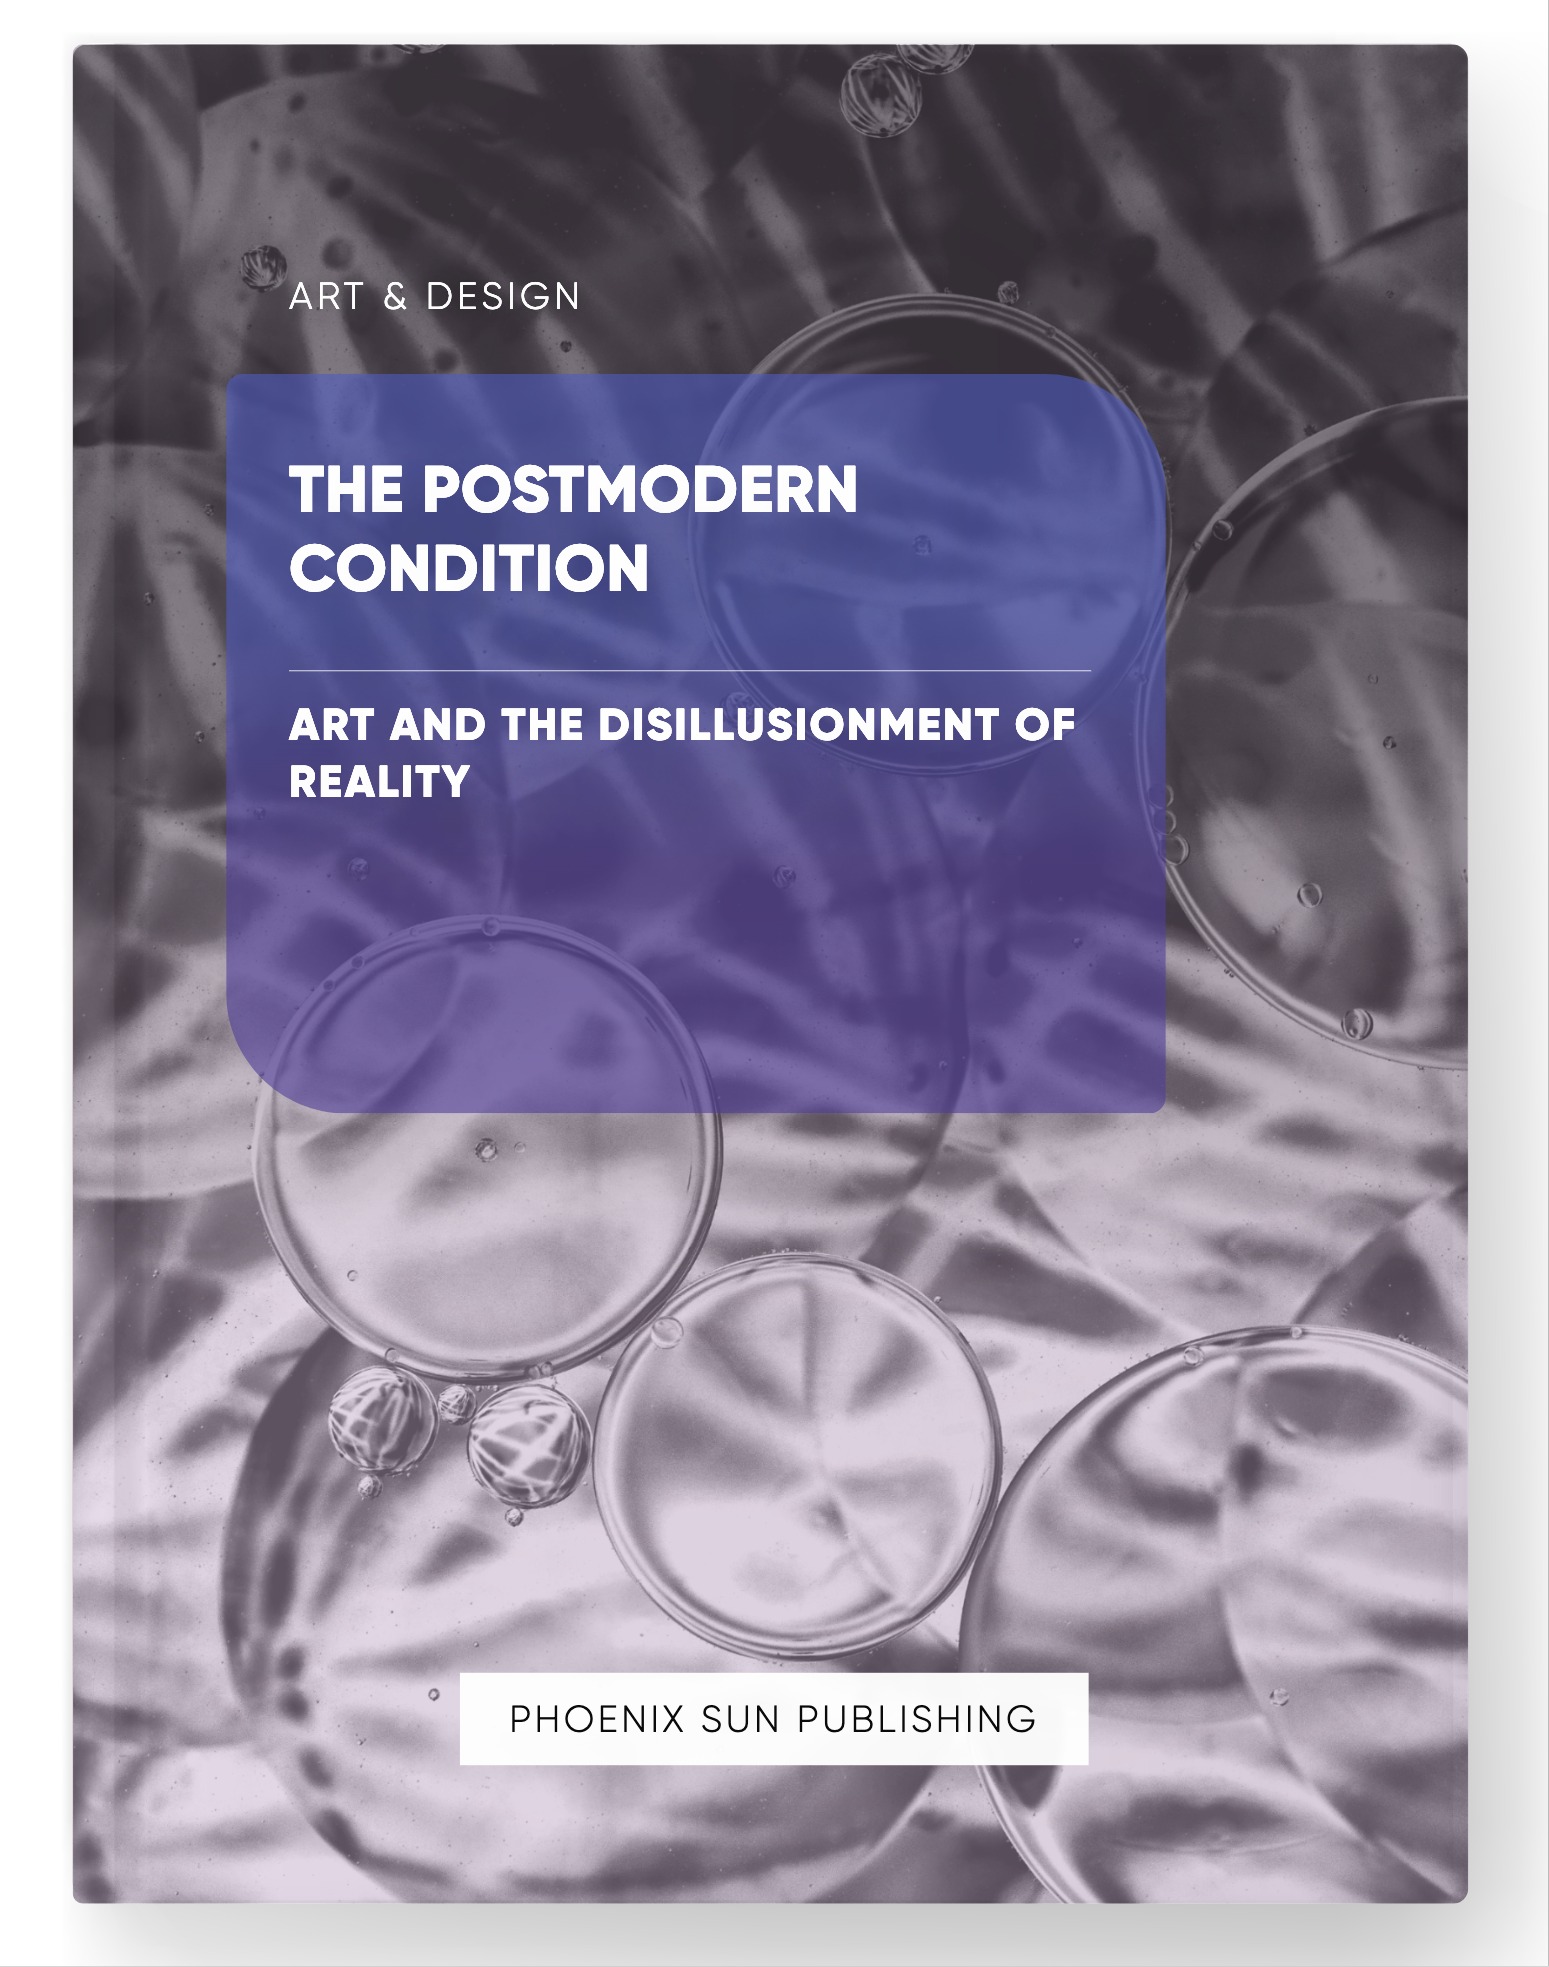 The Postmodern Condition – Art and the Disillusionment of Reality